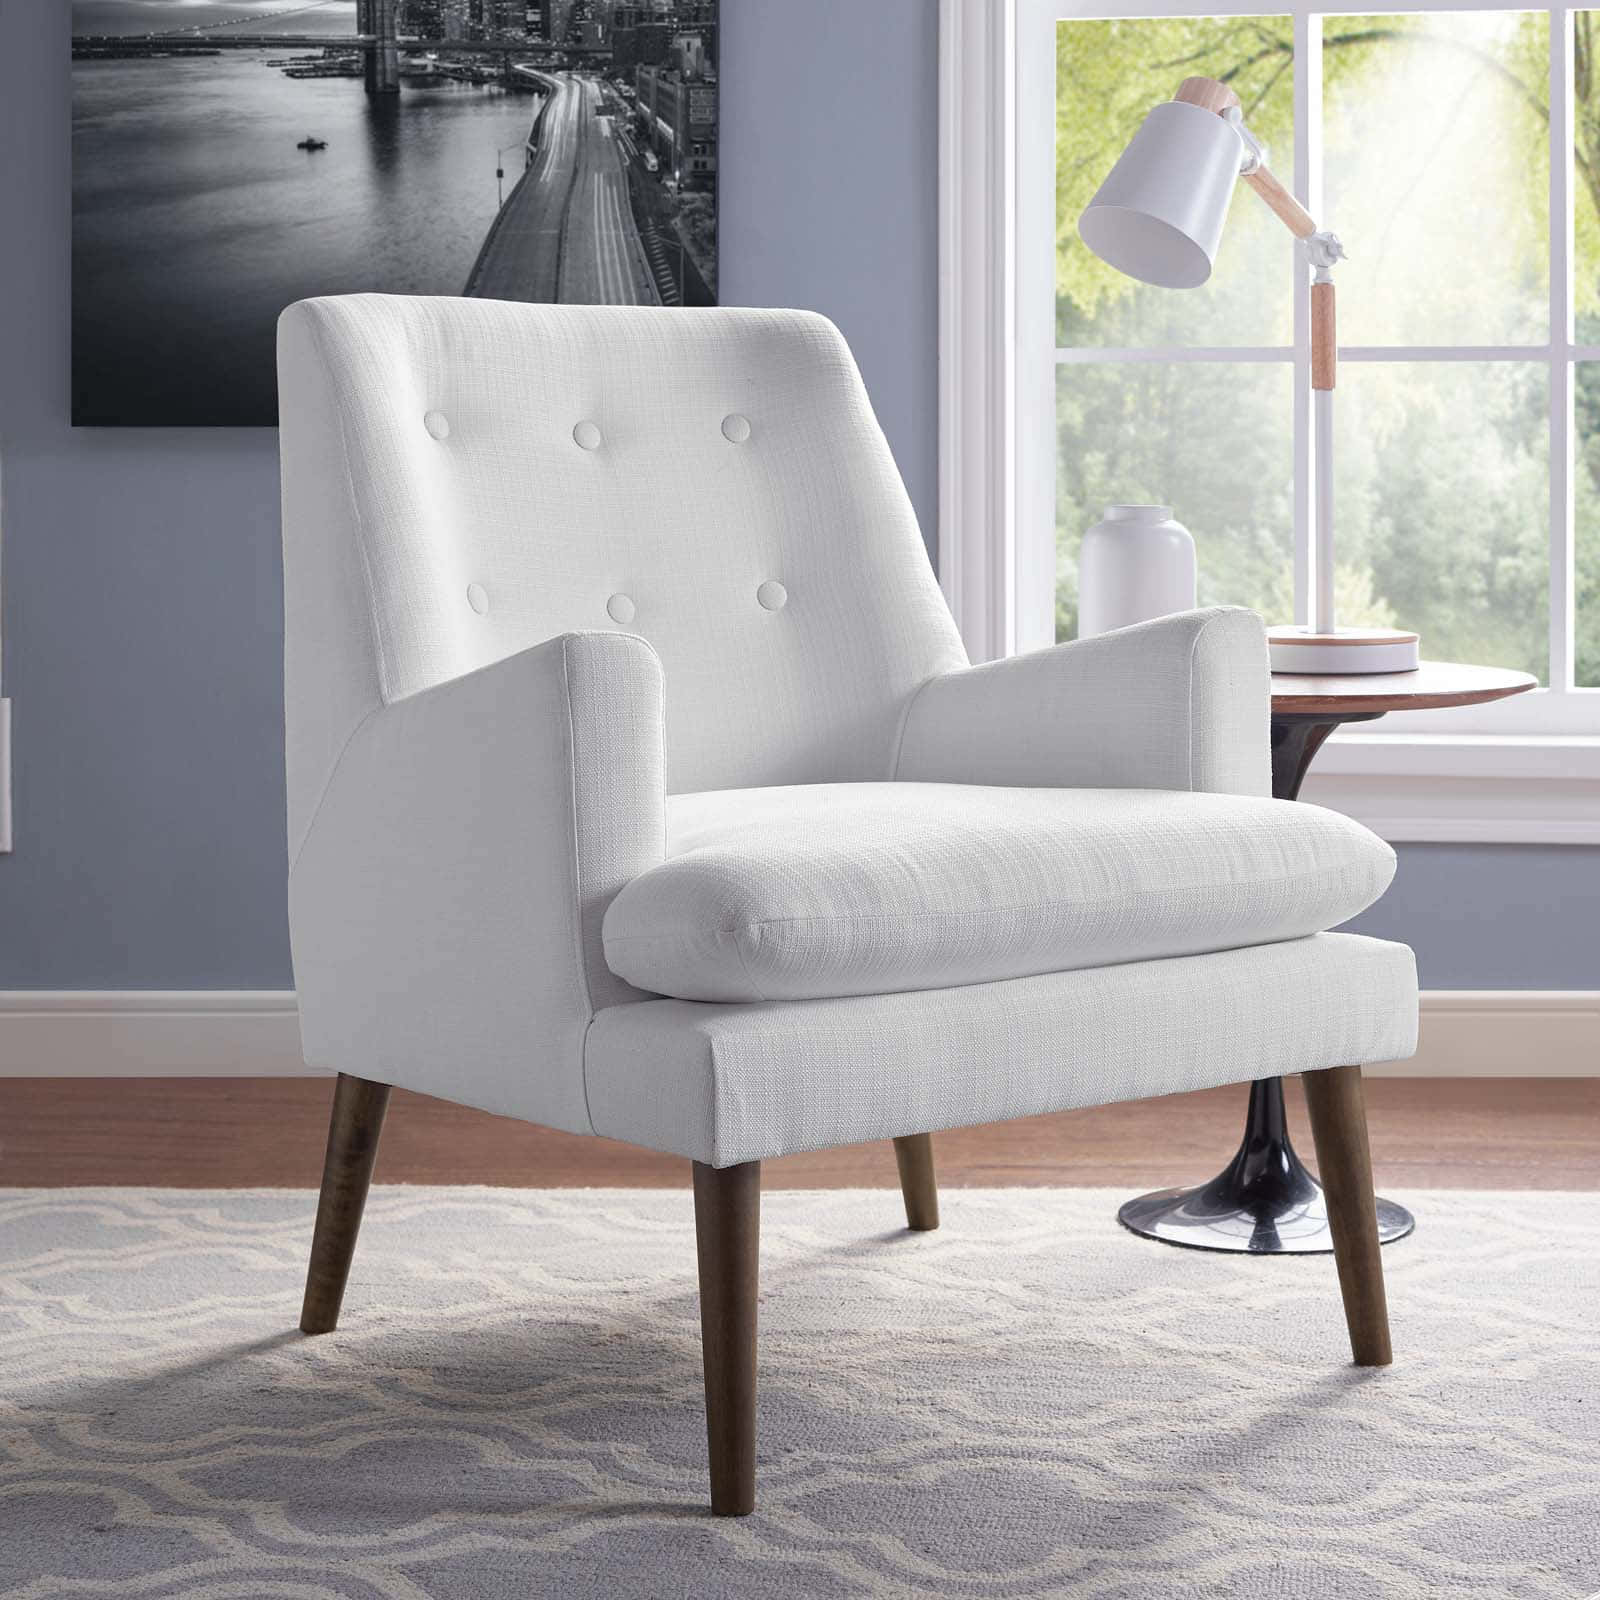 A White Chair In A Room With A Large Window Wallpaper